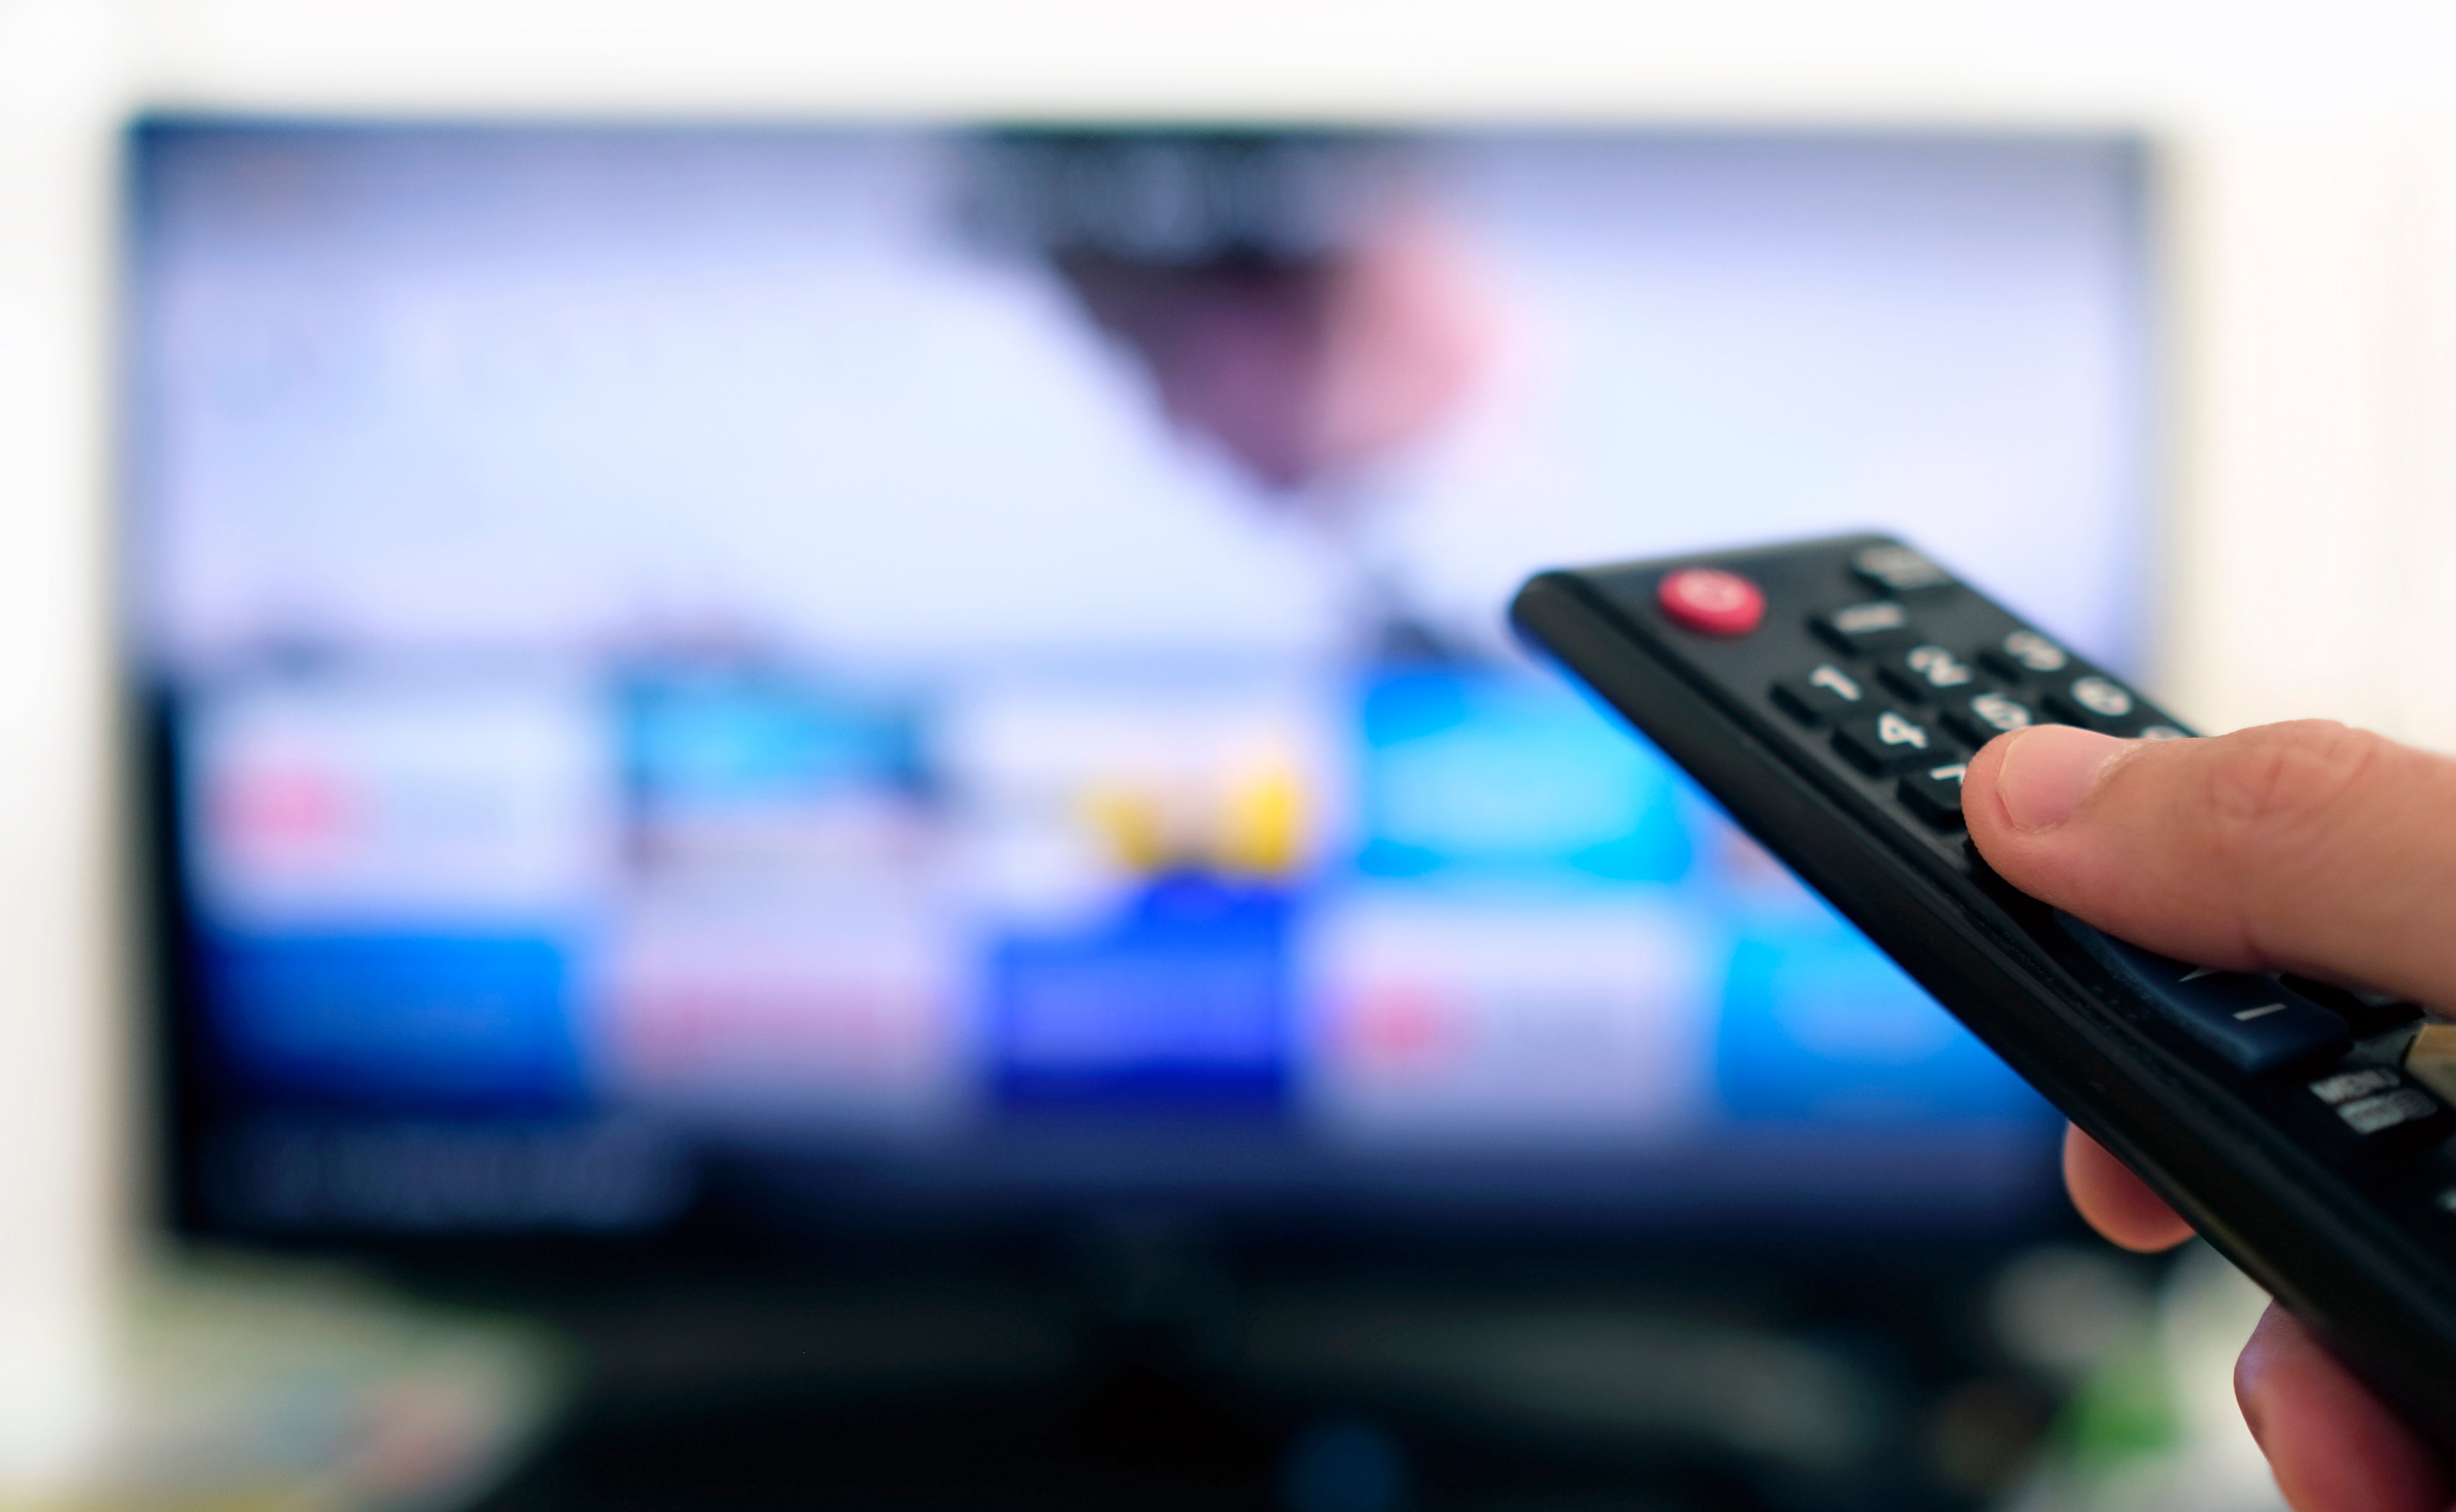 Adults who watch TV for prolonged periods are over a third more likely to develop blood clots than others